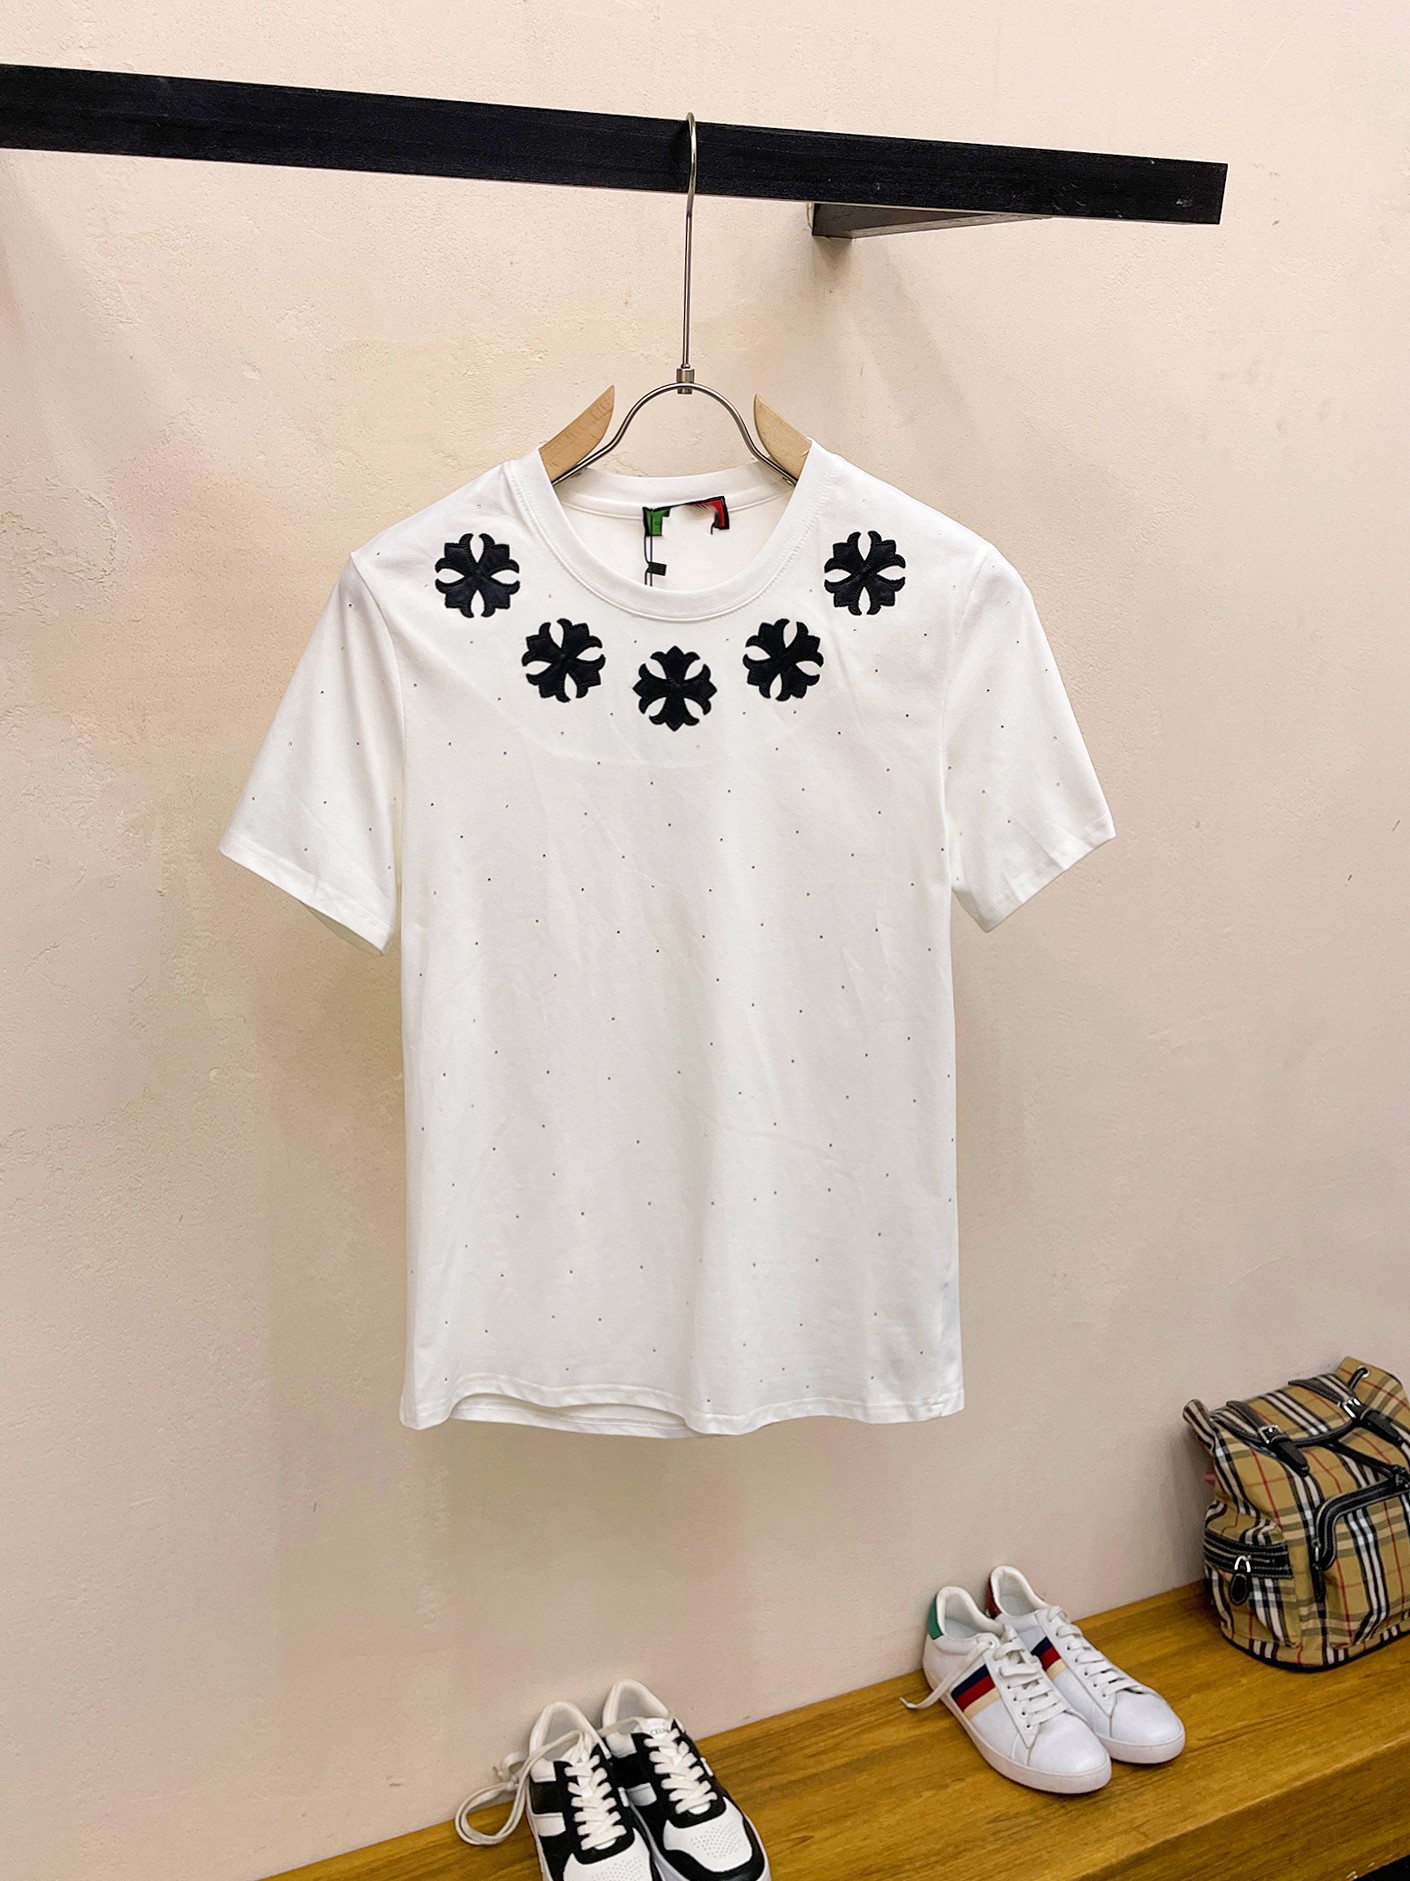 Chrome Hearts Wholesale
 Clothing T-Shirt Customize Best Quality Replica
 Men Cotton Mercerized Spring/Summer Collection Fashion Short Sleeve